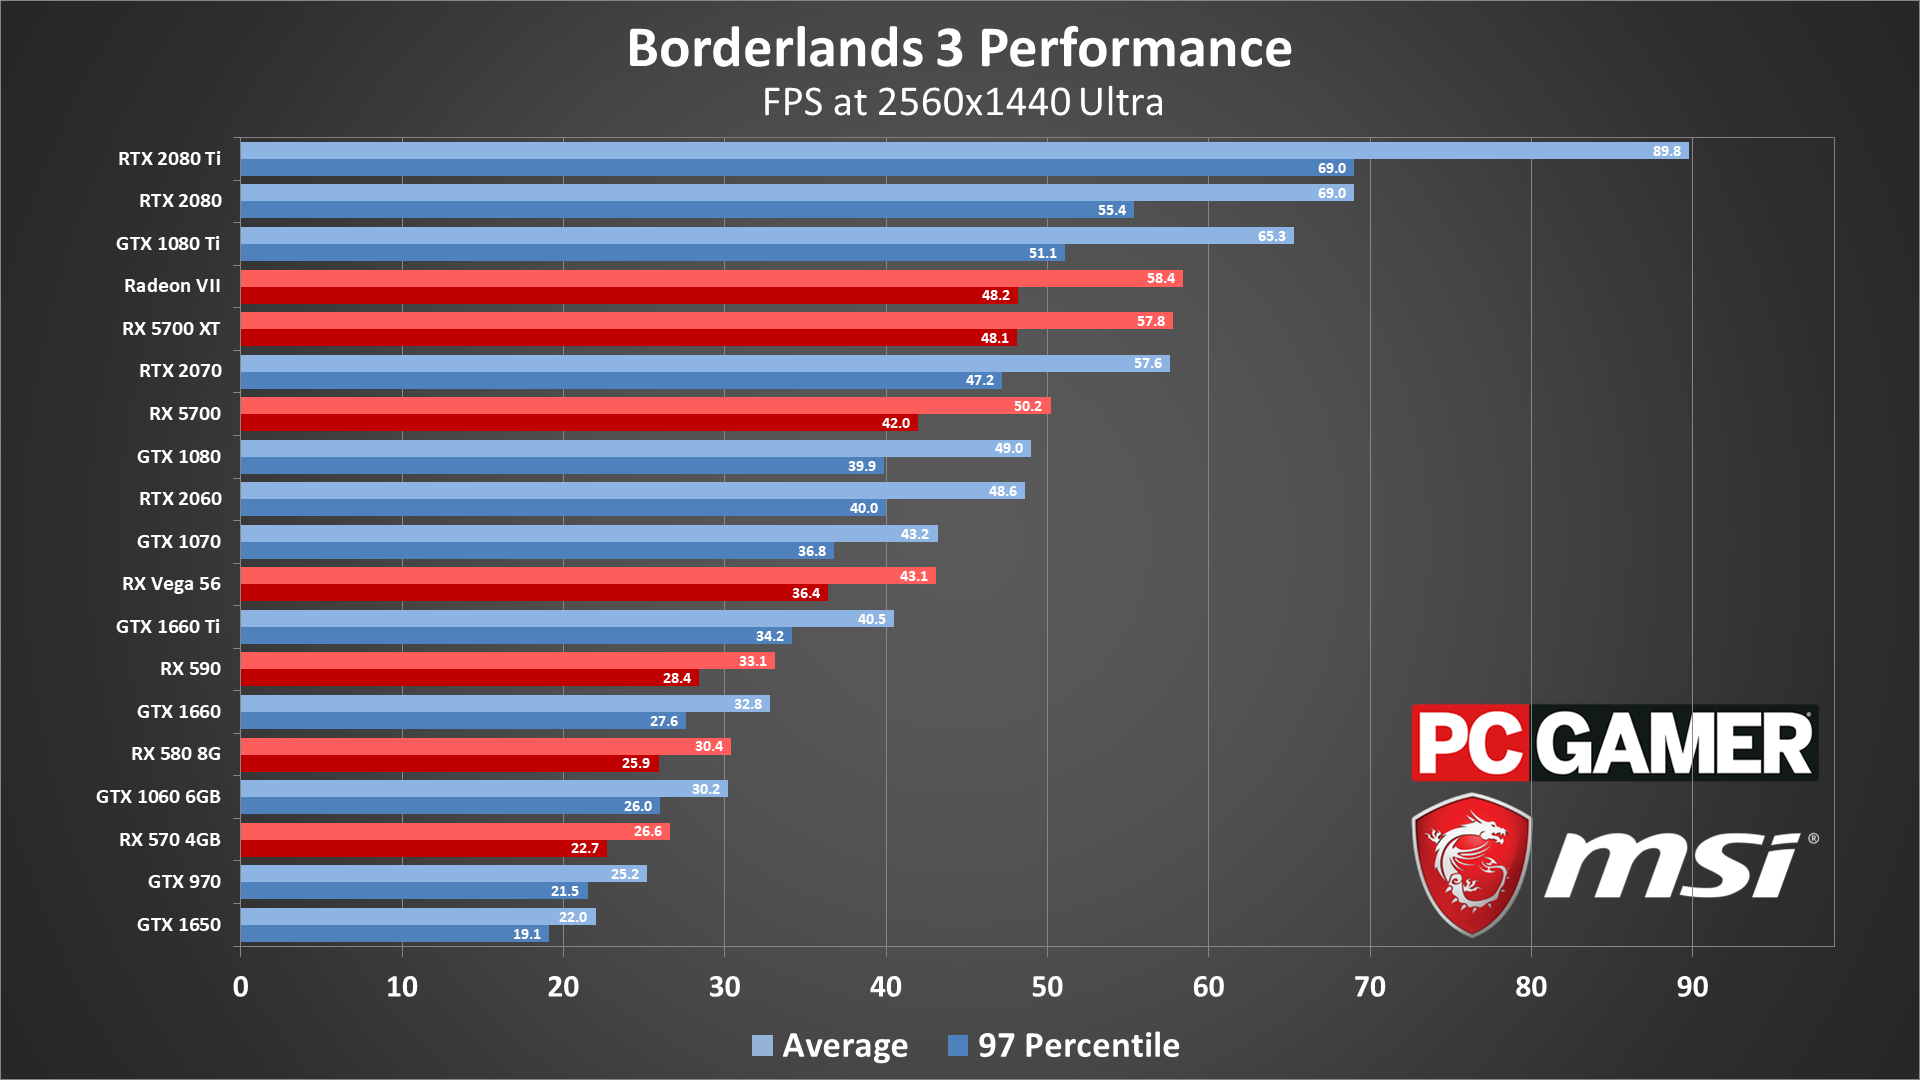 Borderlands 3 System Requirements Settings Benchmarks And Performance Analysis Pc Gamer